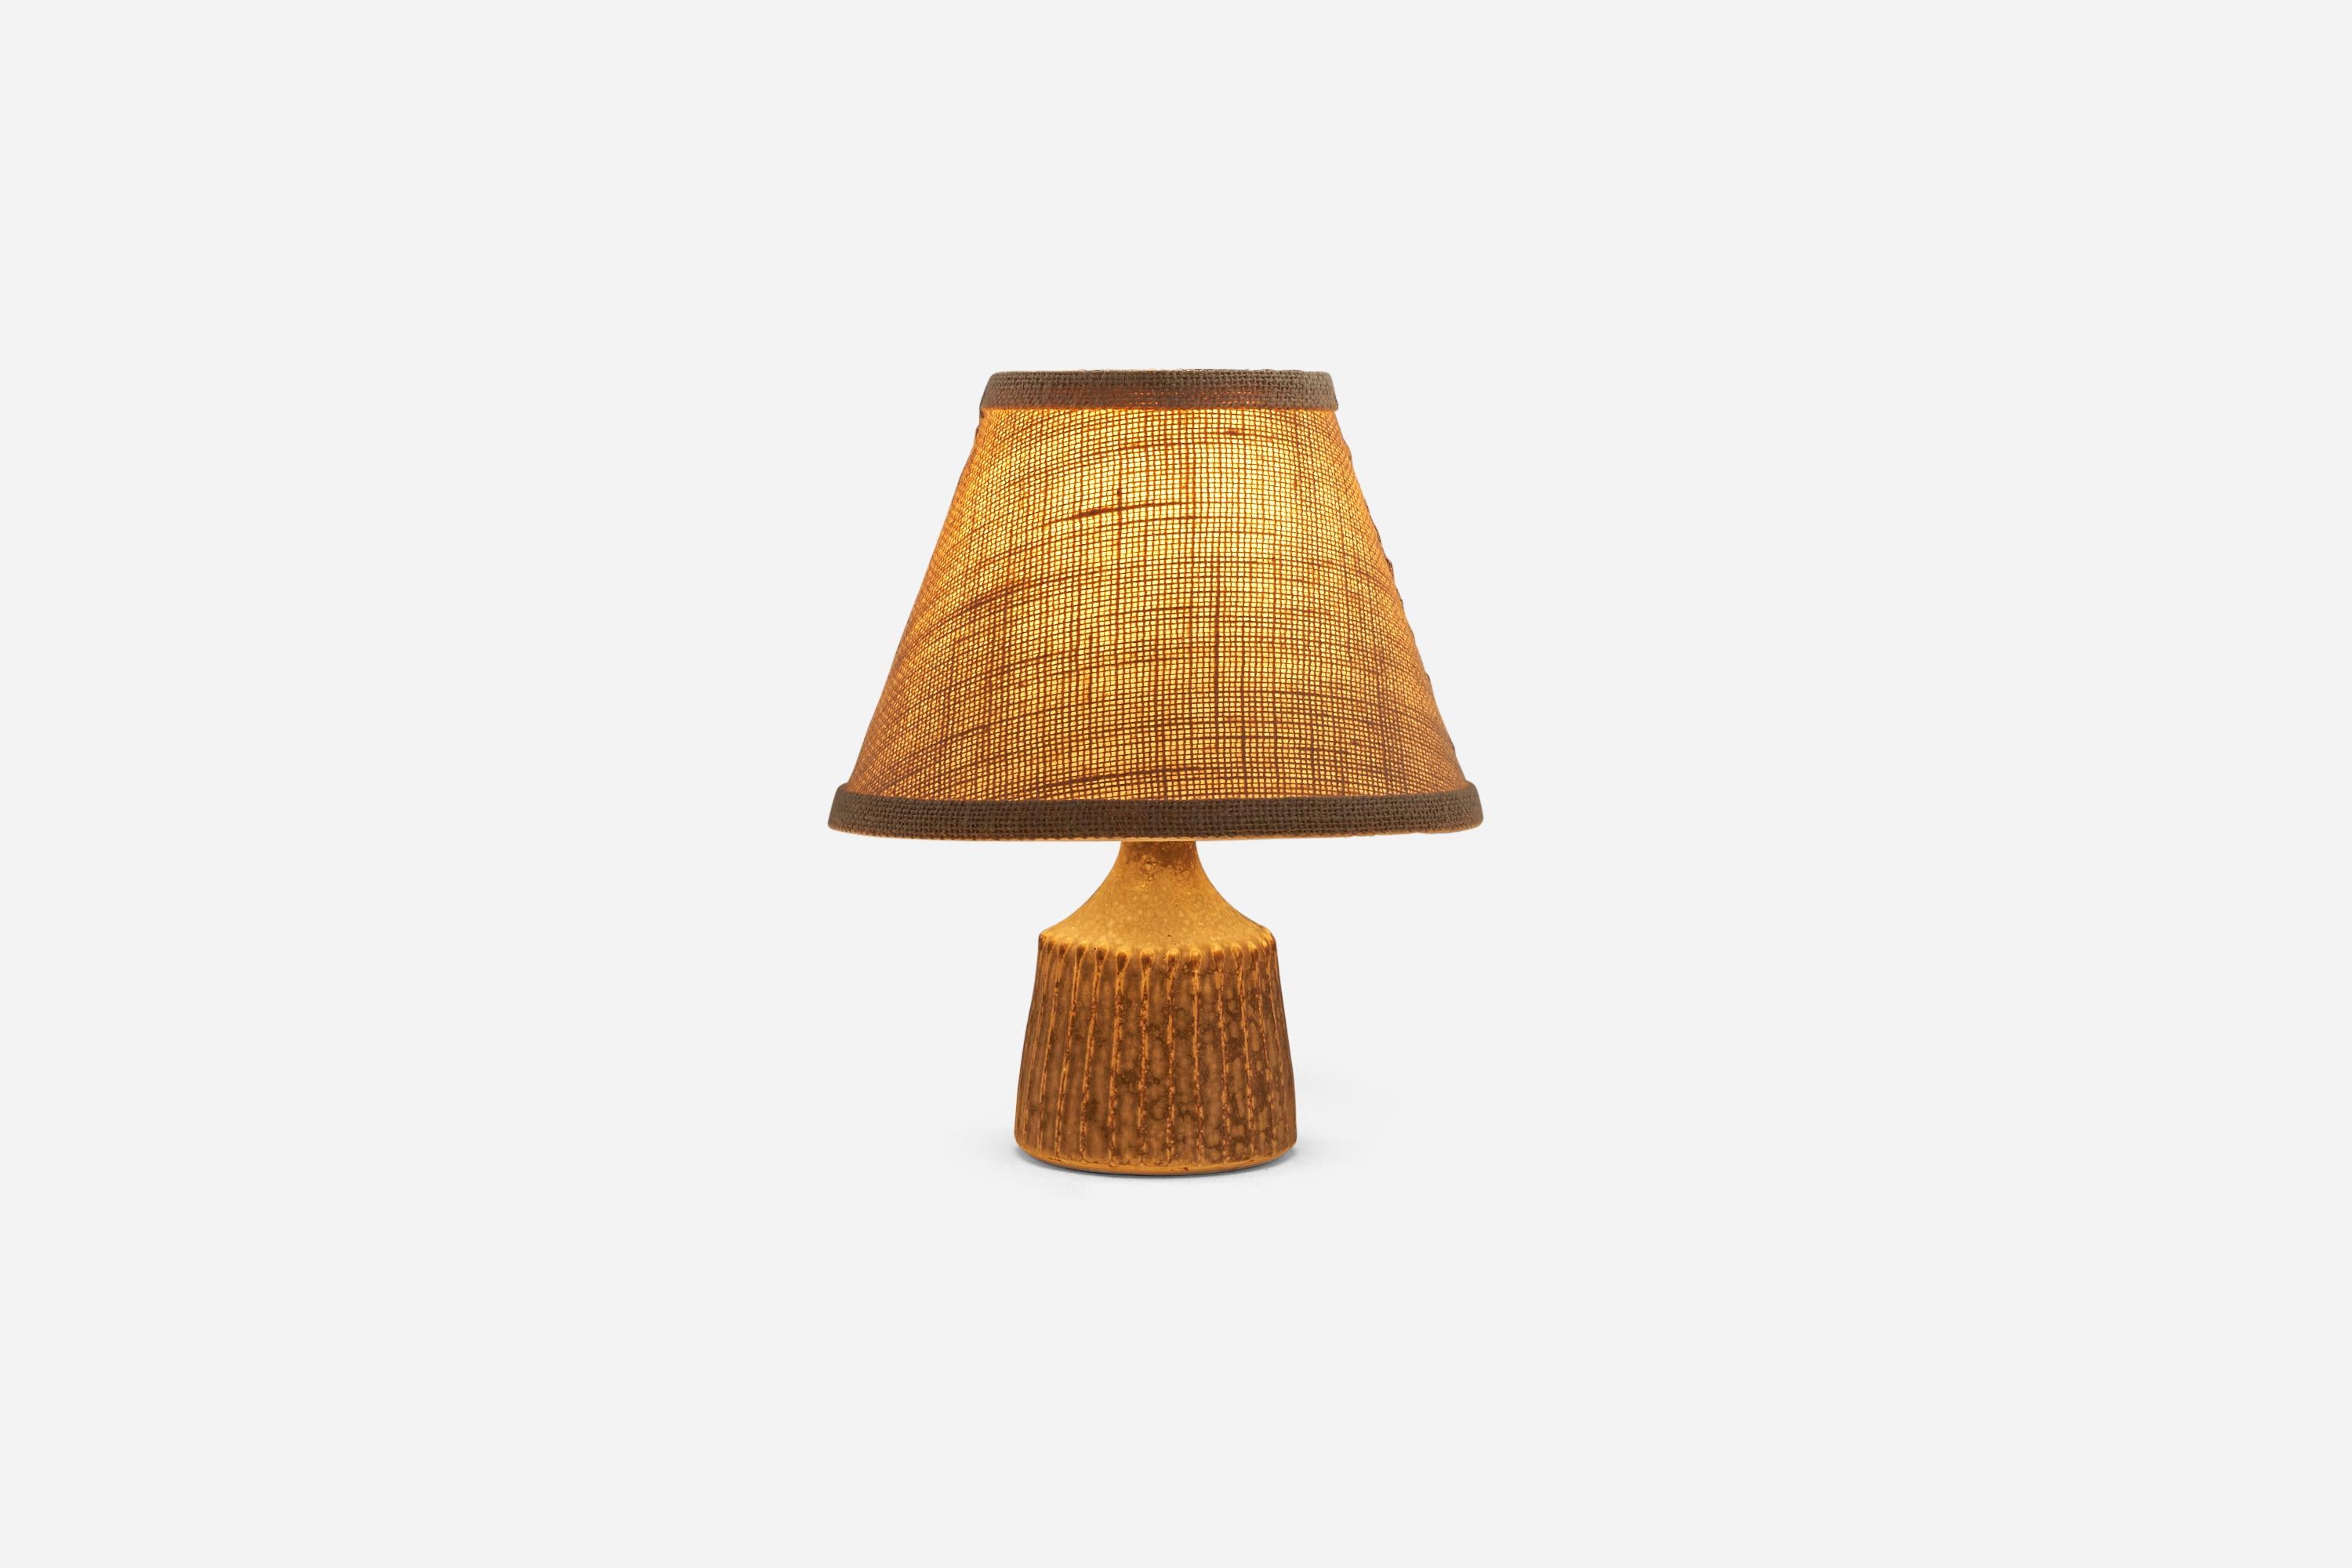 Swedish Rolf Palm, Table Lamp, Brown-Glazed Stoneware, Mölle, Sweden, 1960s For Sale